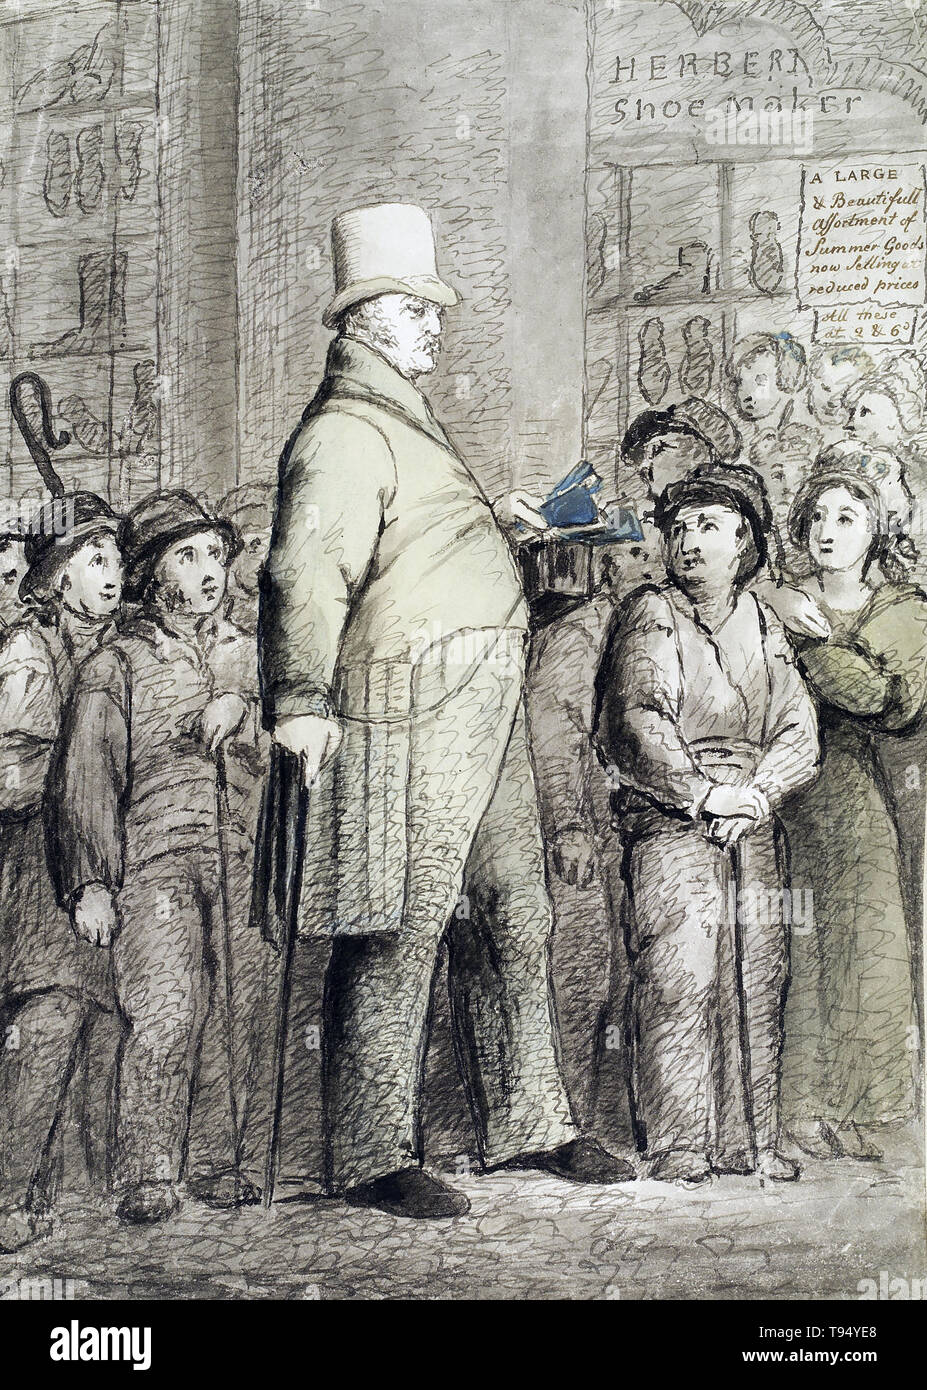 James Henry Lambier, also known as the American Giant, exhibited himself in 1825. Before becoming a professional giant he was a captain in the French Imperial Mameluke Horse Guard. He was just over seven feet tall. Ink and Watercolor, c. 1820s by Gahagain. Stock Photo